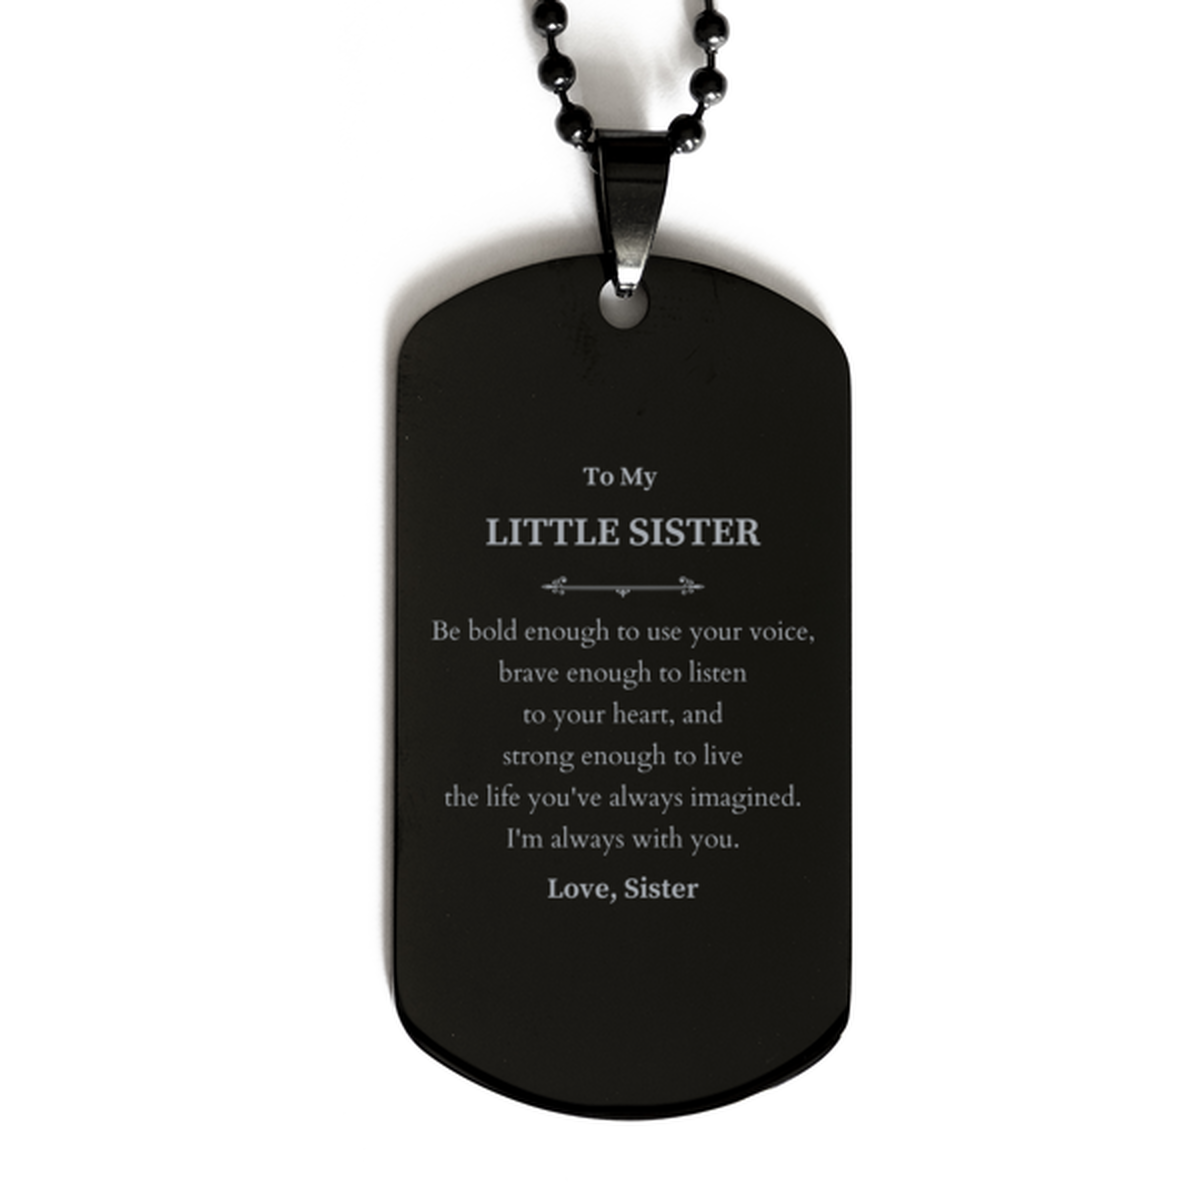 Keepsake Little Sister Black Dog Tag Gift Idea Graduation Christmas Birthday Little Sister from Sister, Little Sister Be bold enough to use your voice, brave enough to listen to your heart. Love, Sister